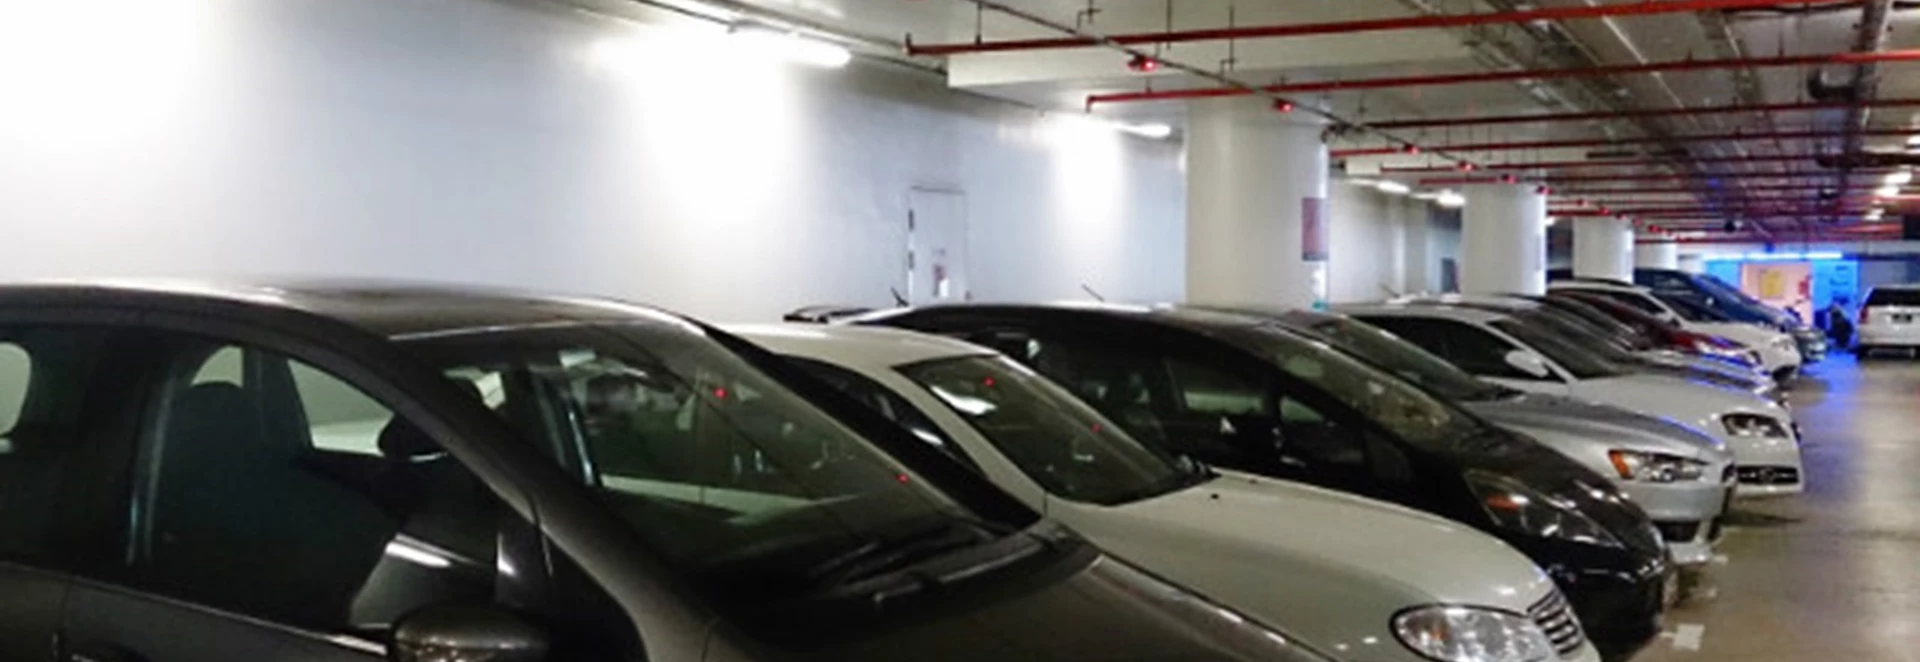 Three ways to find your lost car in a car park 